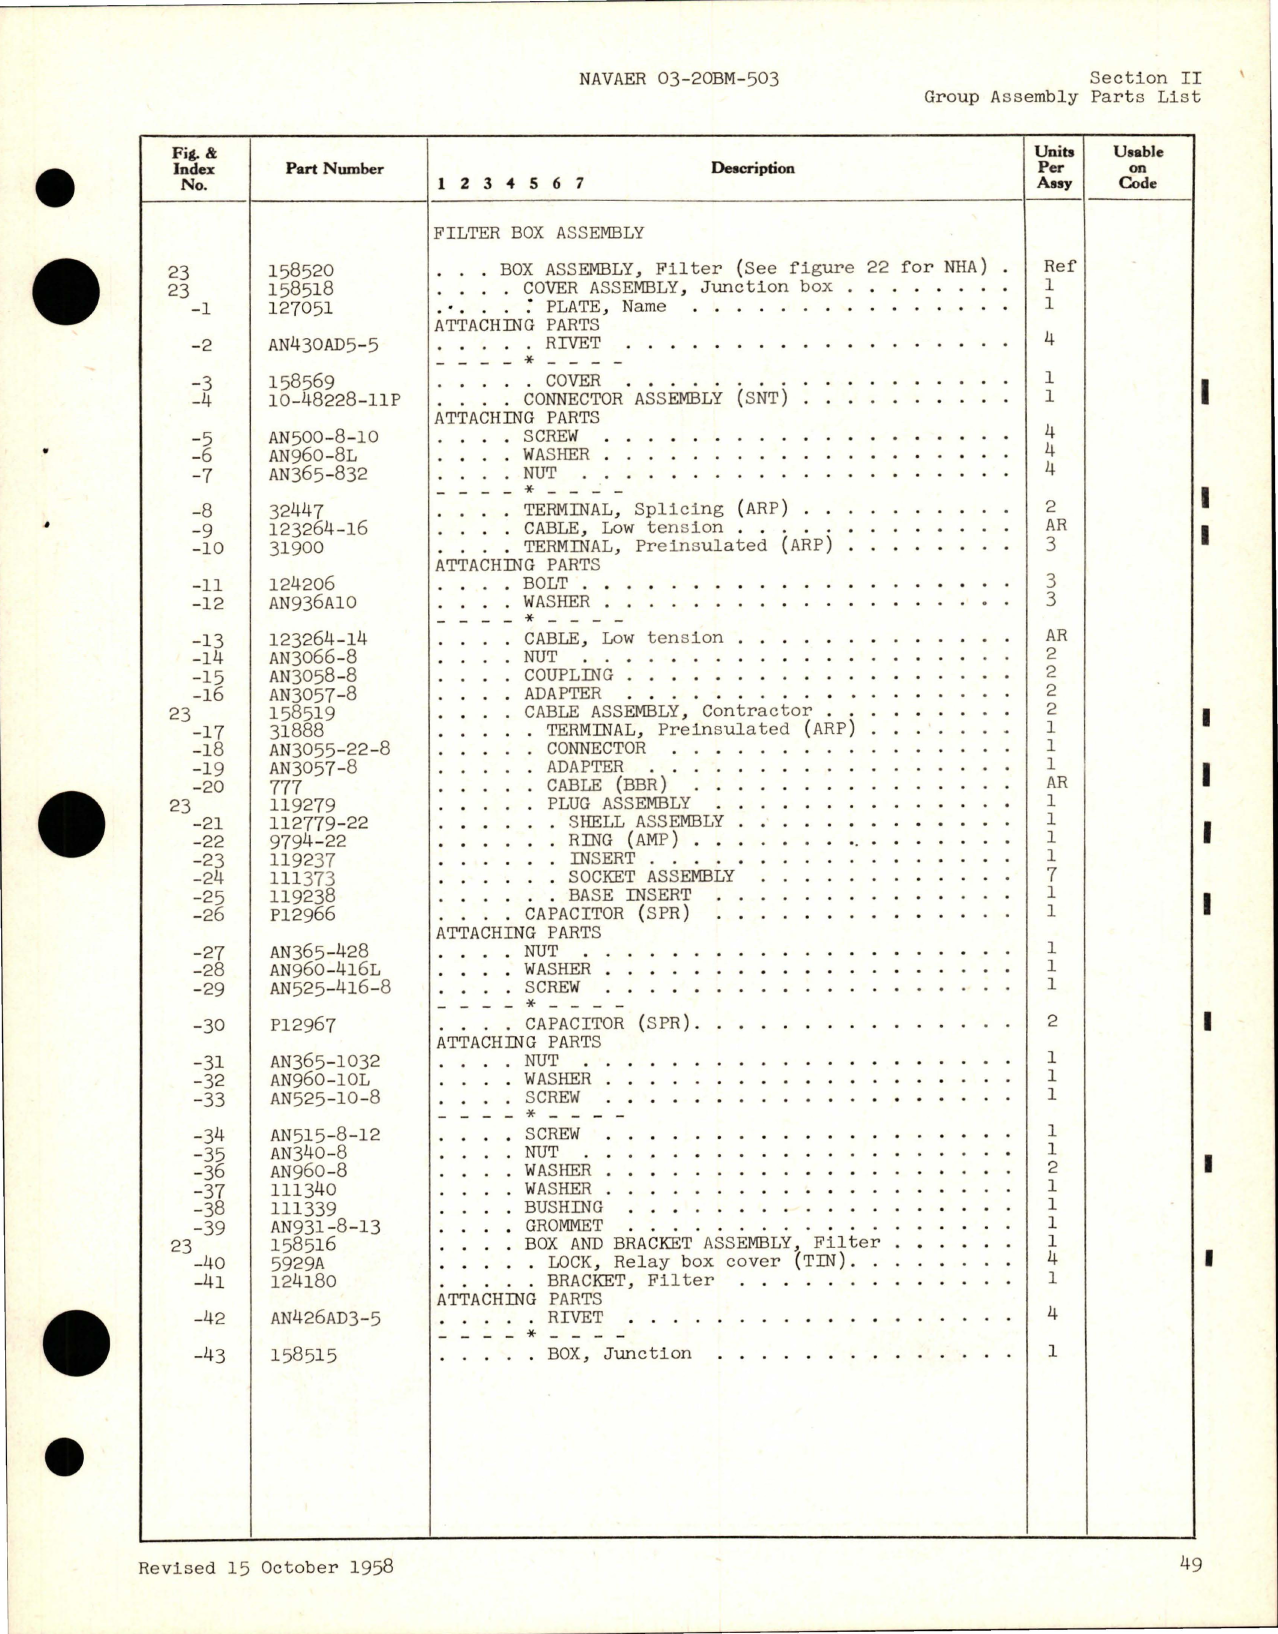 Sample page 5 from AirCorps Library document: Illustrated Parts Breakdown for Propeller and Controls - Models C634S-C102, C634S-C104